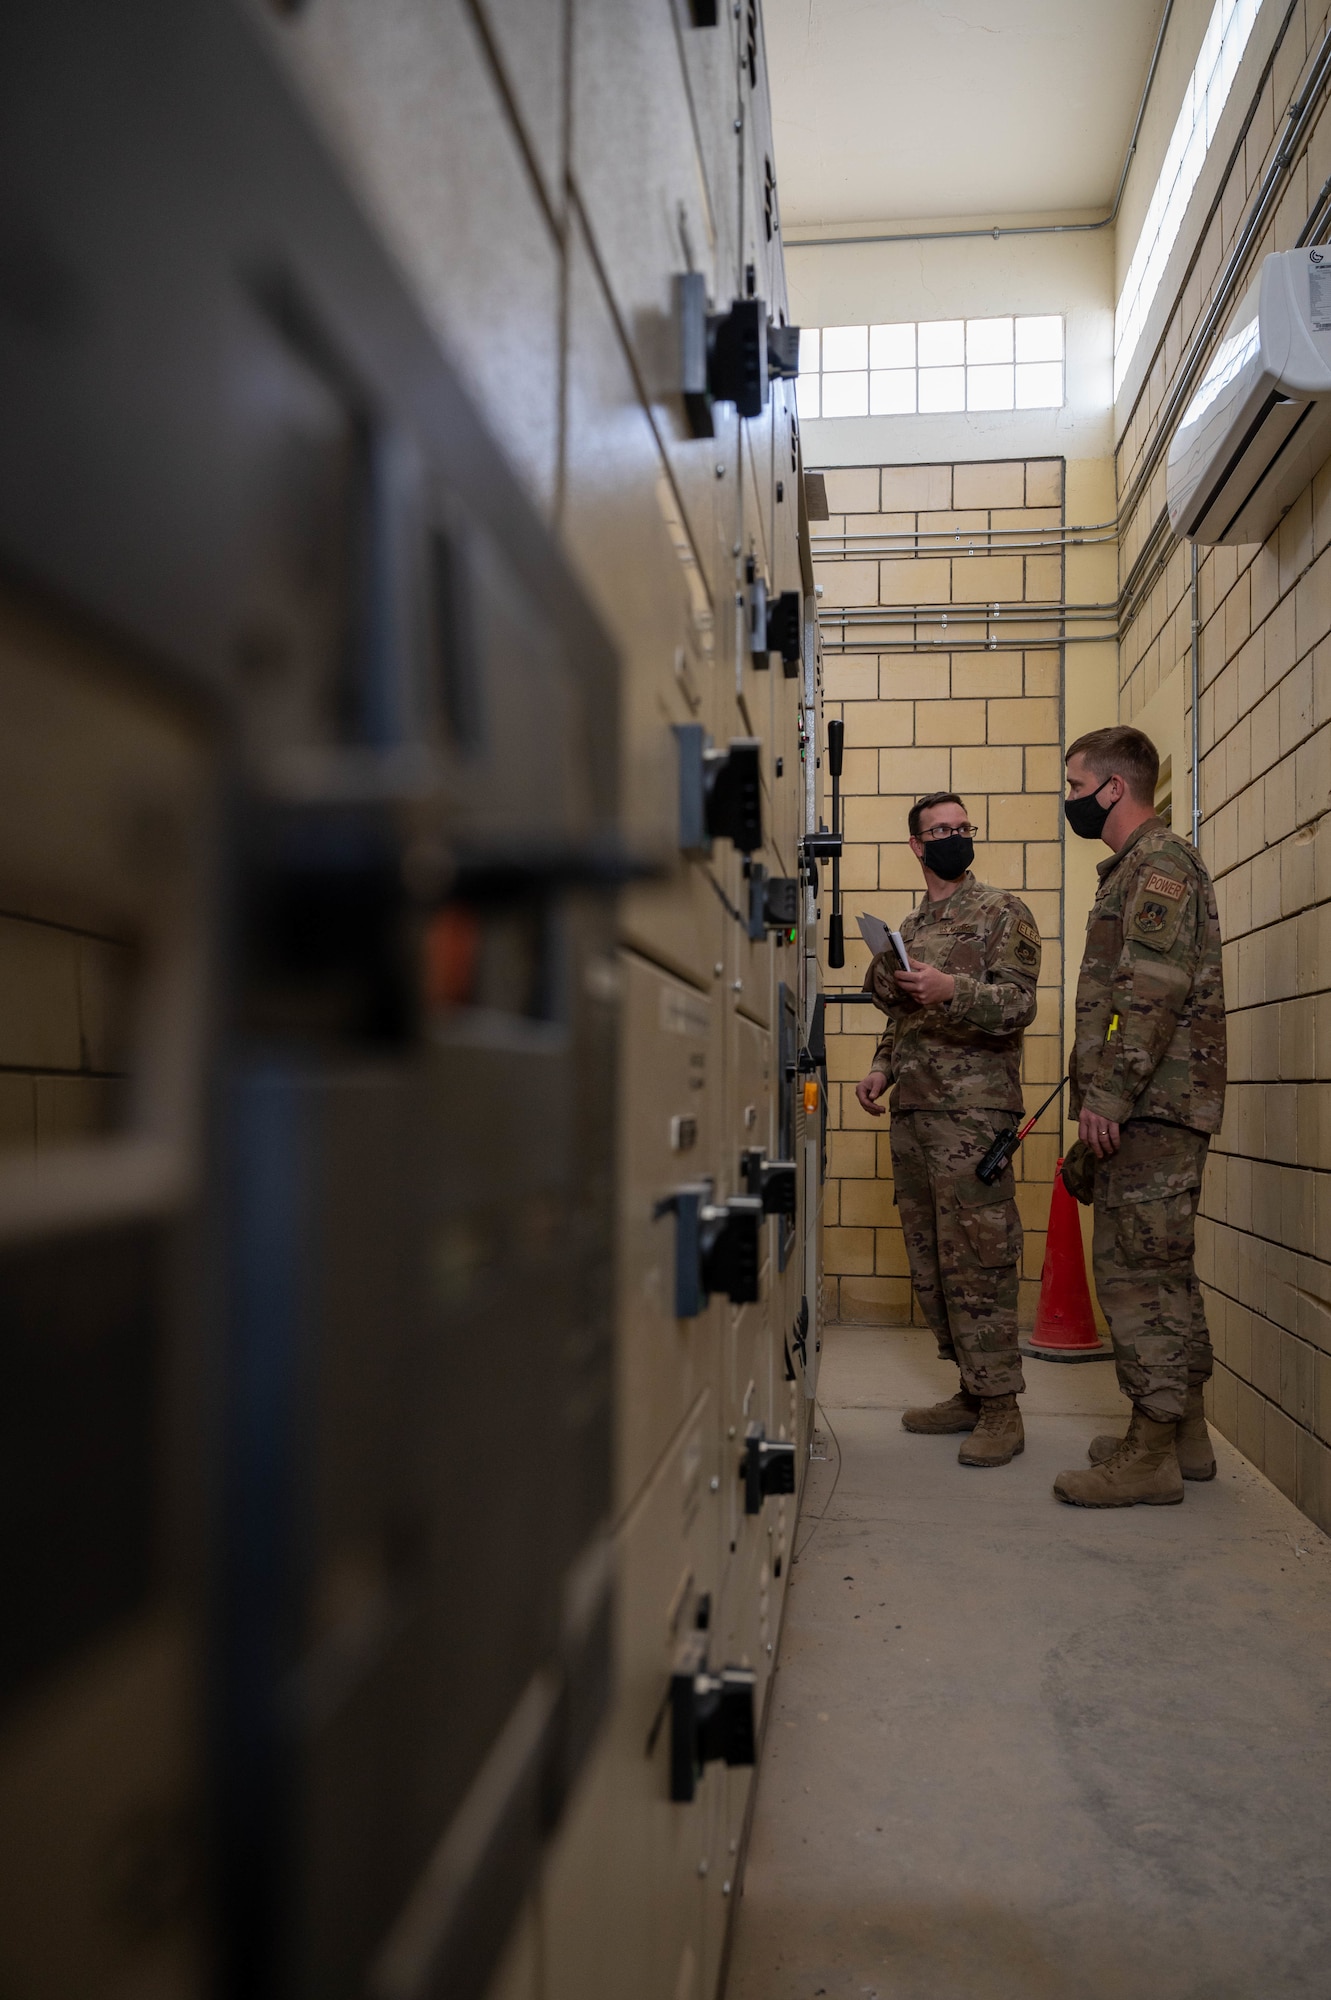 For members of the 386th Expeditionary Civil Engineer Squadron, it's all hands on deck to keep that generator in top tier shape.